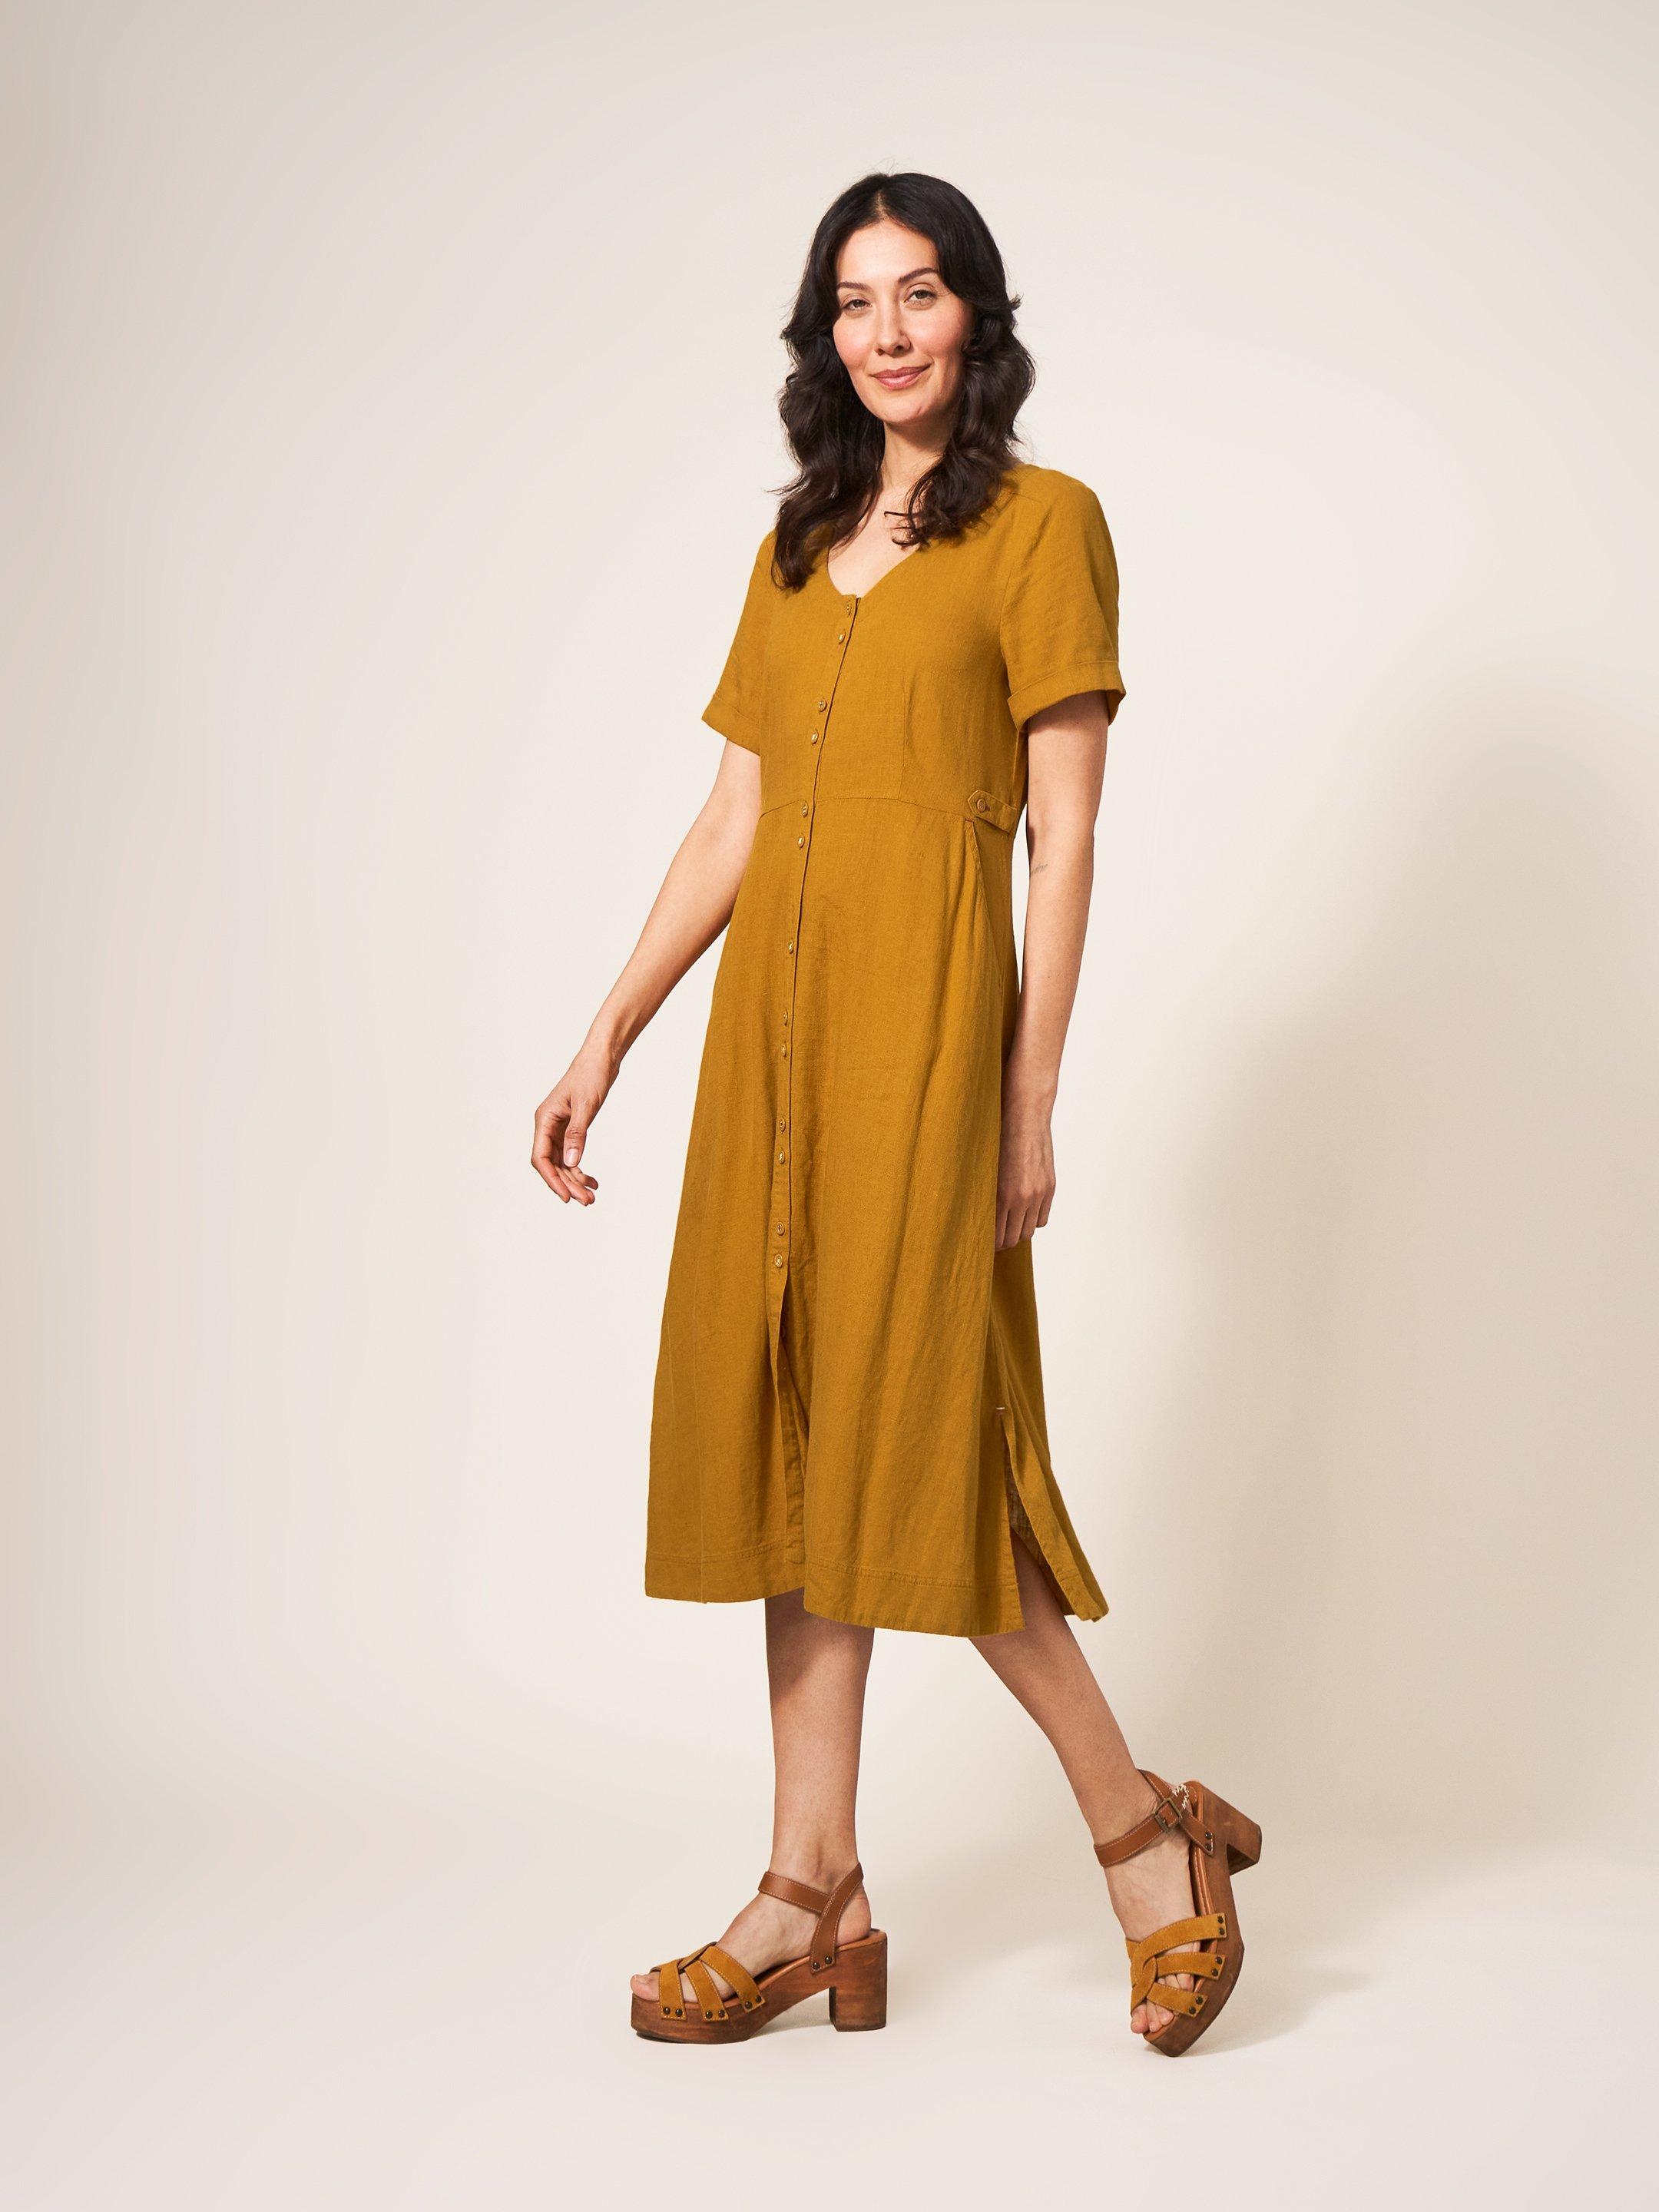 Ivy Dress in MID TAN - LIFESTYLE